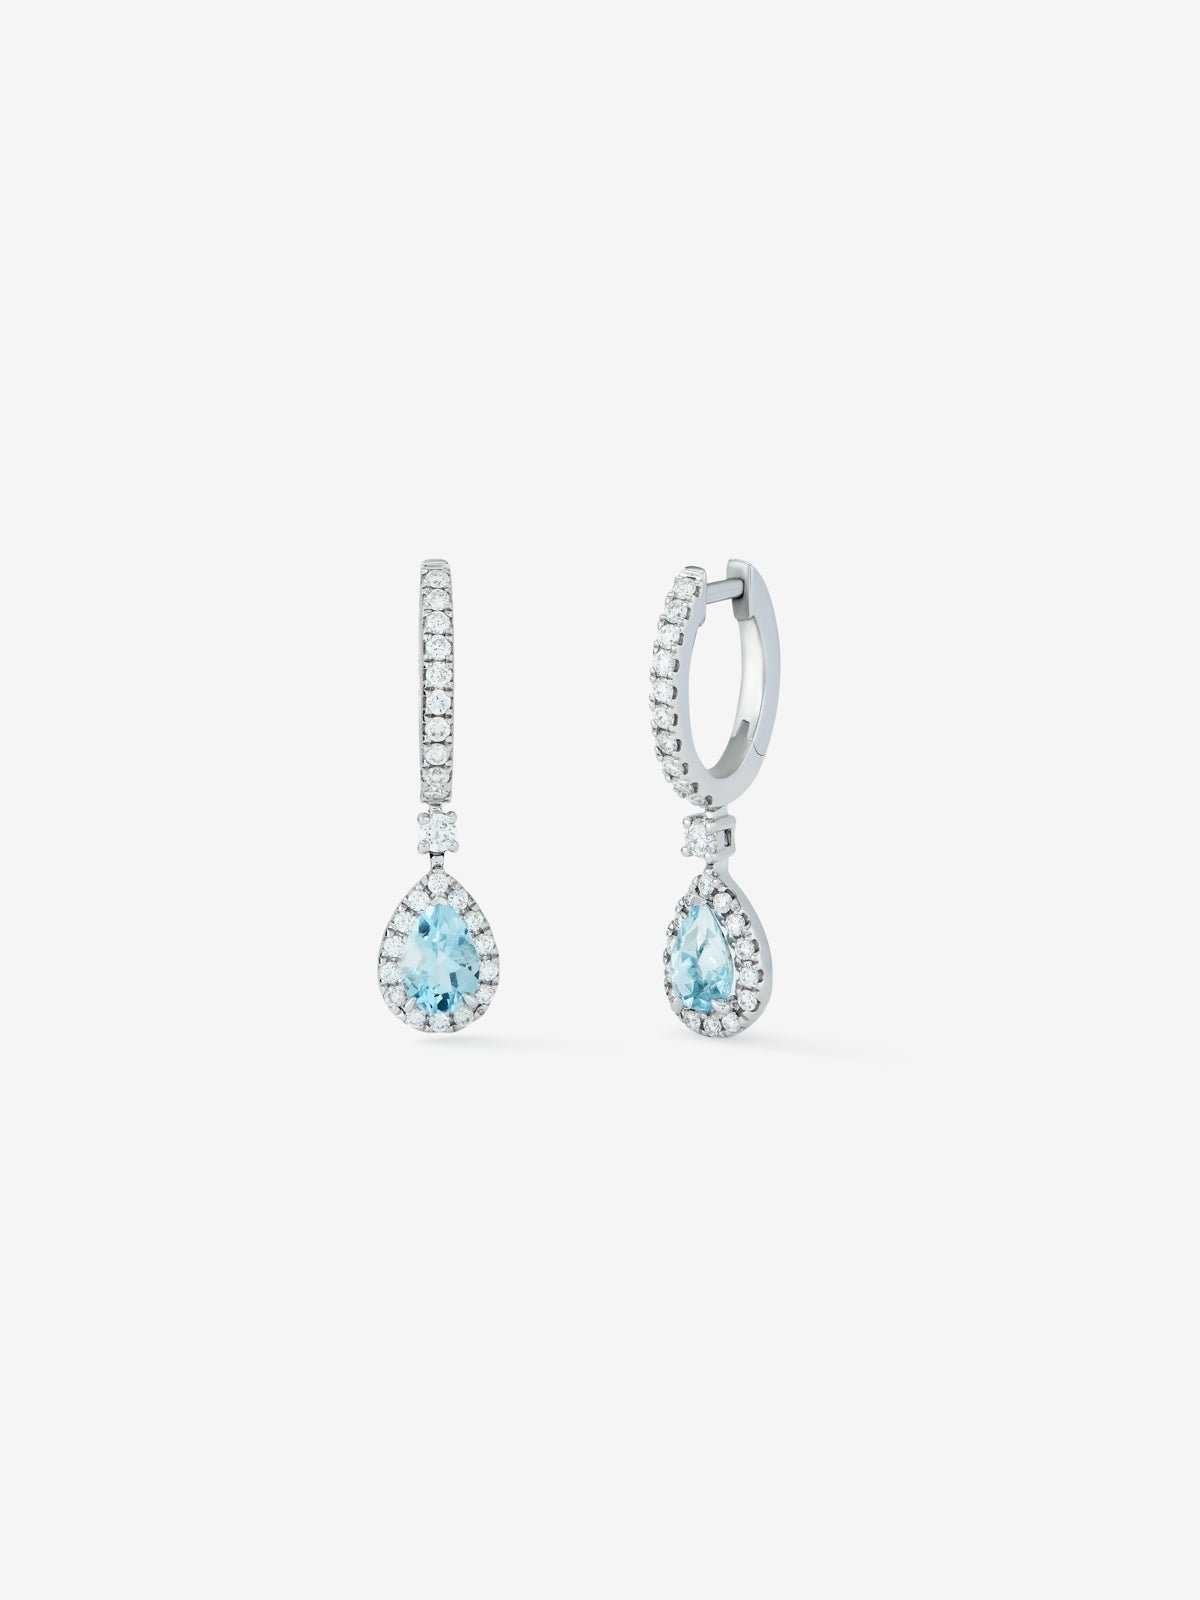 18K white gold earrings with 2 pear-cut aquamarines with a total of 0.75 cts and 50 brilliant-cut diamonds with a total of 0.43 cts